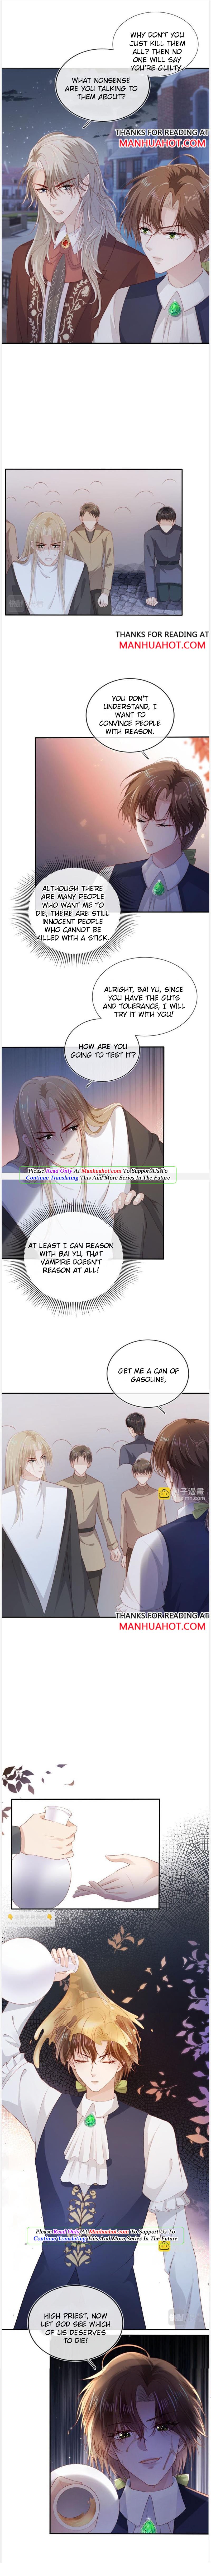 The Villain Loves Me Very Much - Page 4